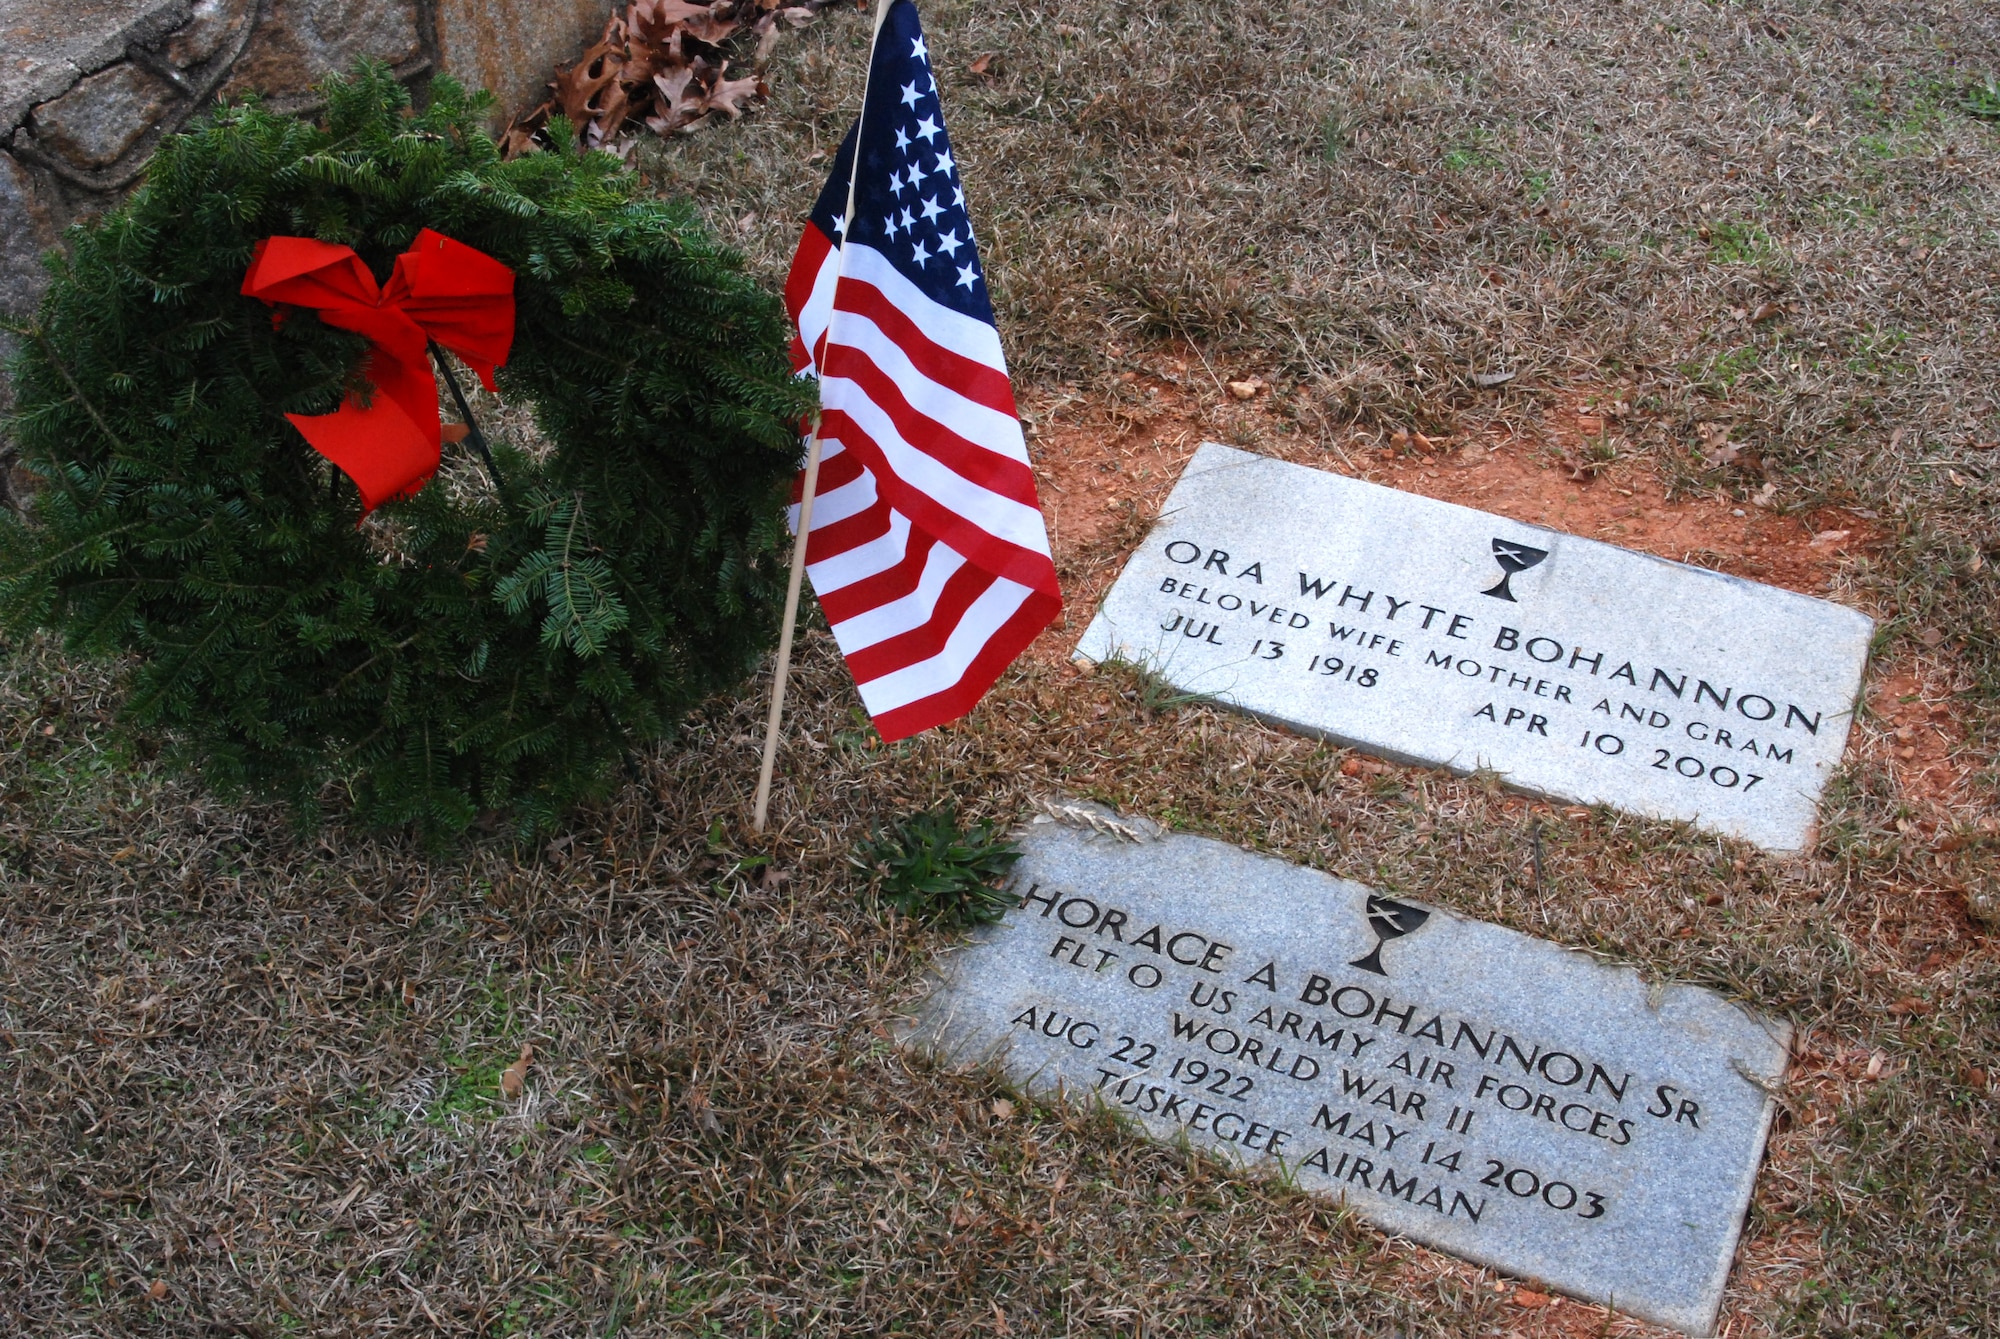 A ceremonial wreath and American Flag was placed at the gravesite of Lt. Horace Bohannon, a Tuskegee Airman flight officer who trained as a pilot during World War II and resided in Atlanta afterwards.  Lieutenant Bohannon was one of the co-founders of the Atlanta Chapter Tuskegee Airman, Inc. organization. Tuskegee Airman historical  information was provided by Ms. Zellie Orr, Tuskegee Airman historian. (U.S. Air Force photo/Master Sgt. Stan Coleman)